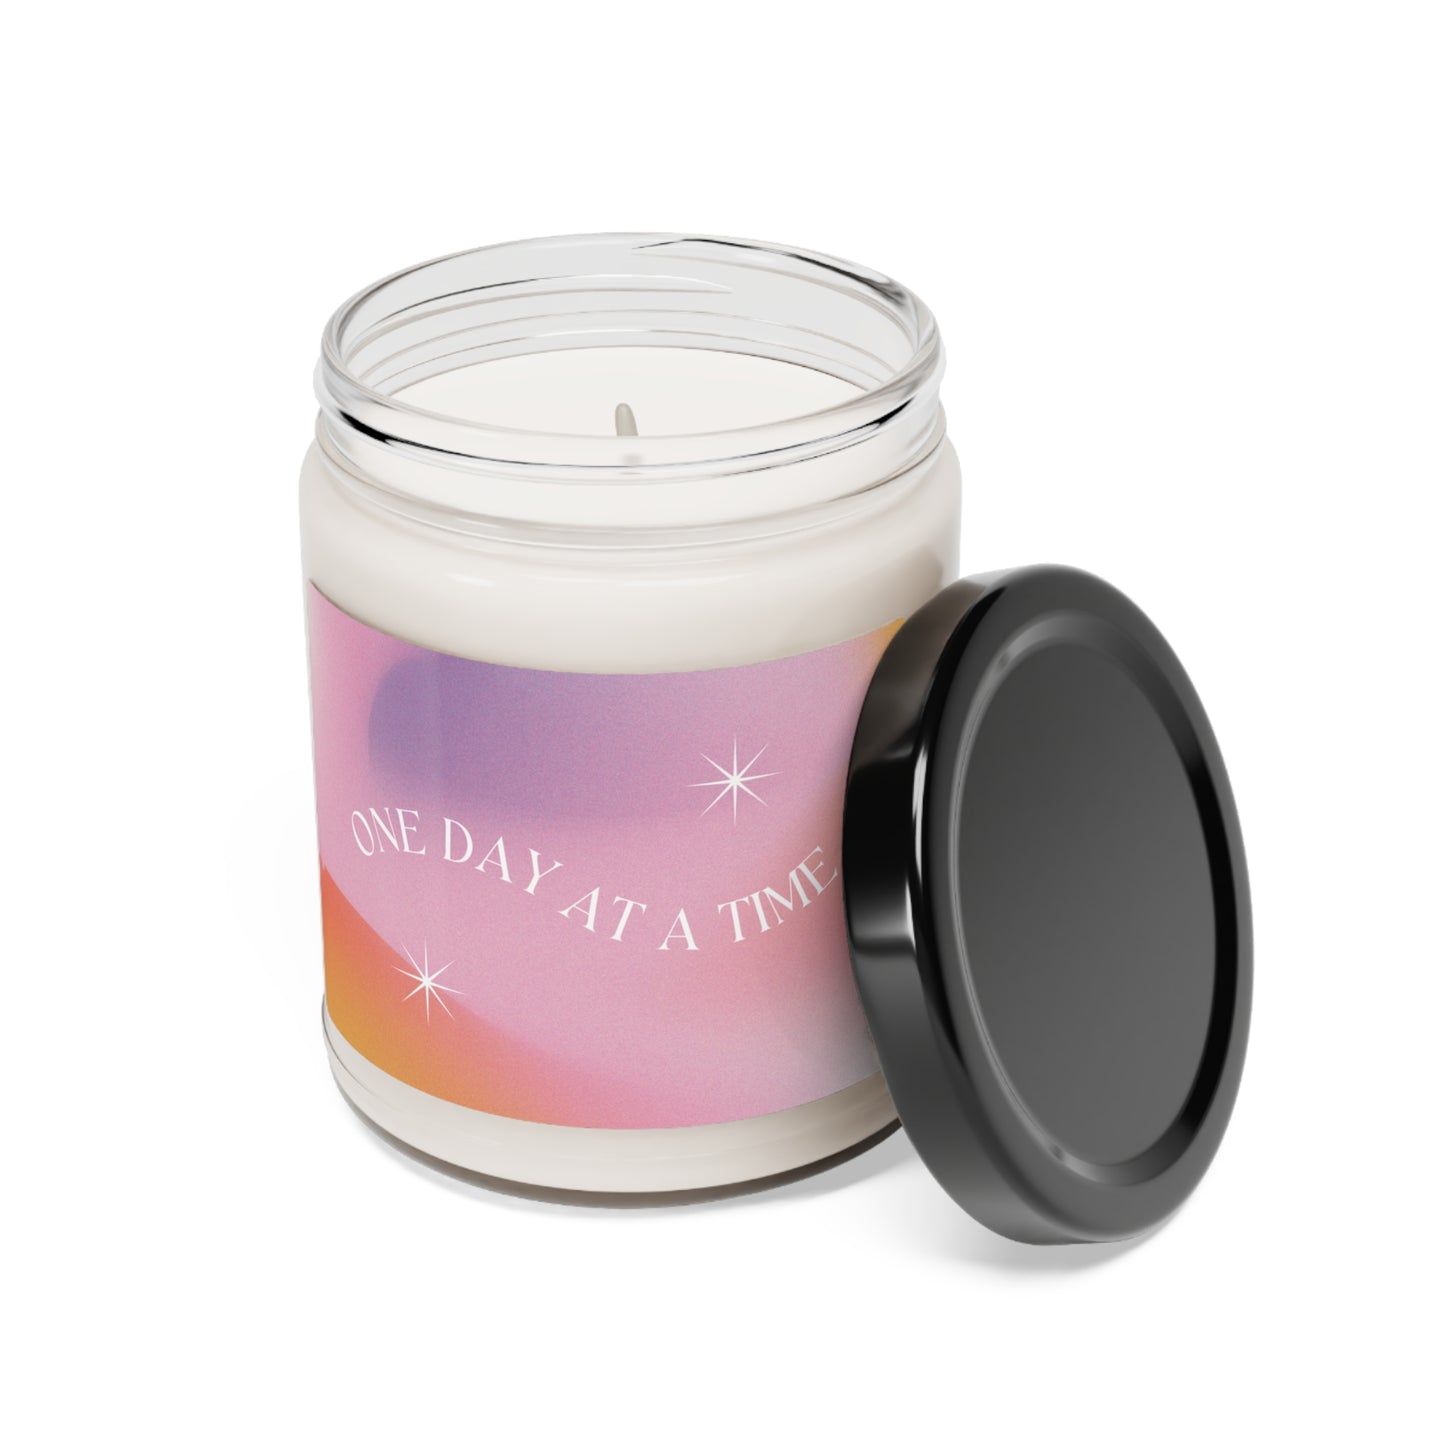 One Day at A Time Cinnamon Vanilla Self Care Soy Wax Candle